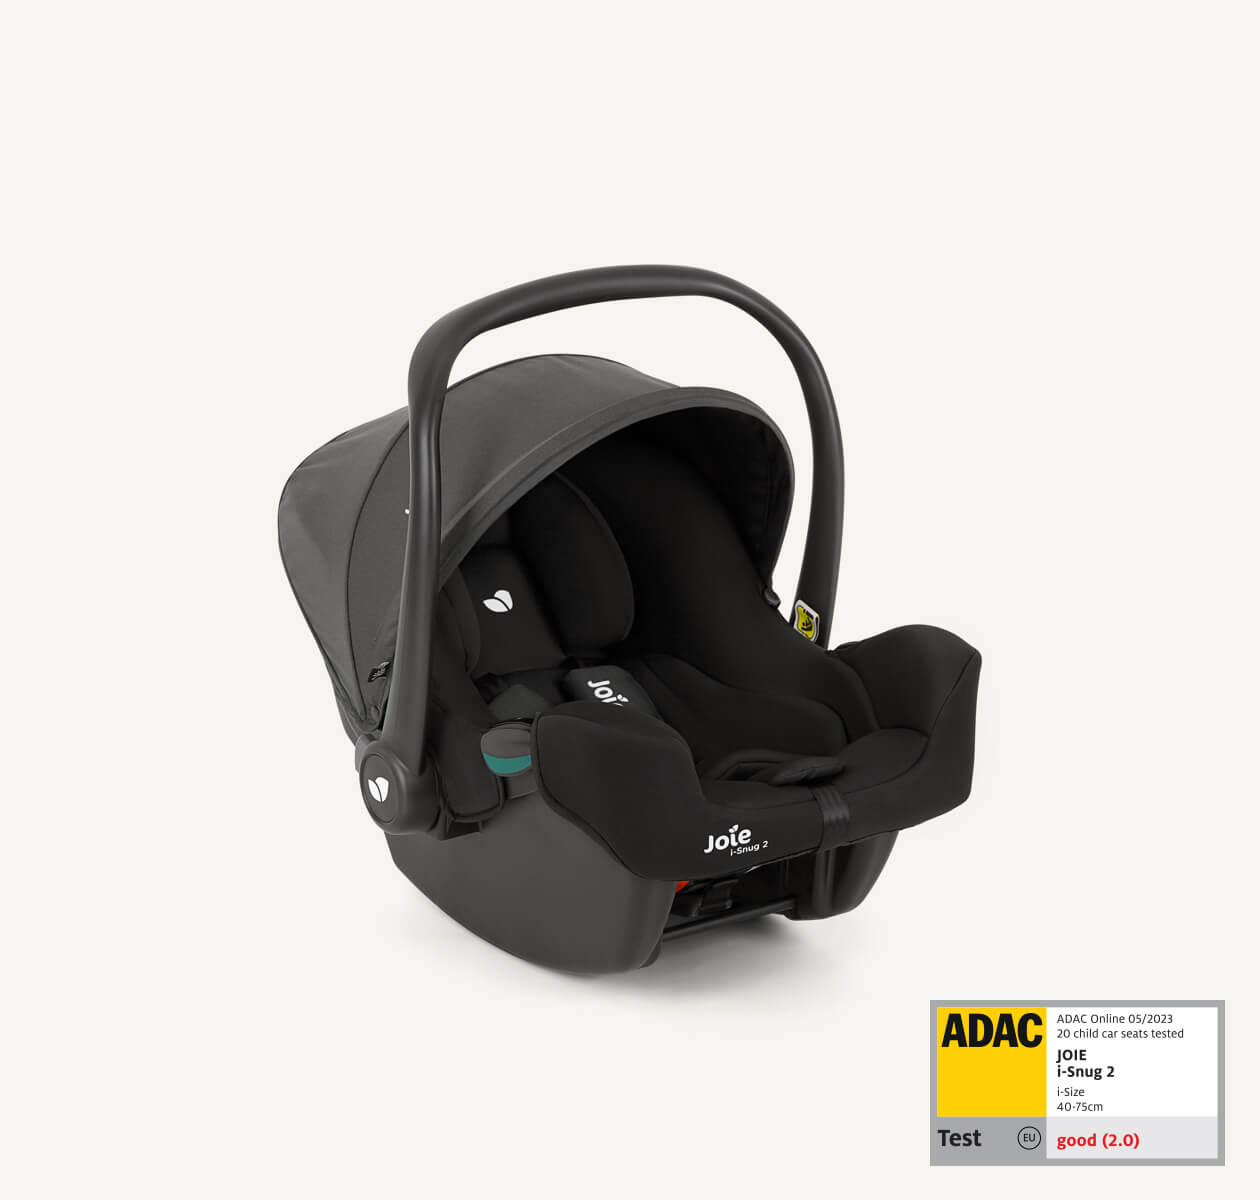 https://dd.joiebaby.com/media/catalog/product/p/1/p1-_joie-carseat-isnug2-coal-right-angle_2.jpg?type=product&height=265&width=265